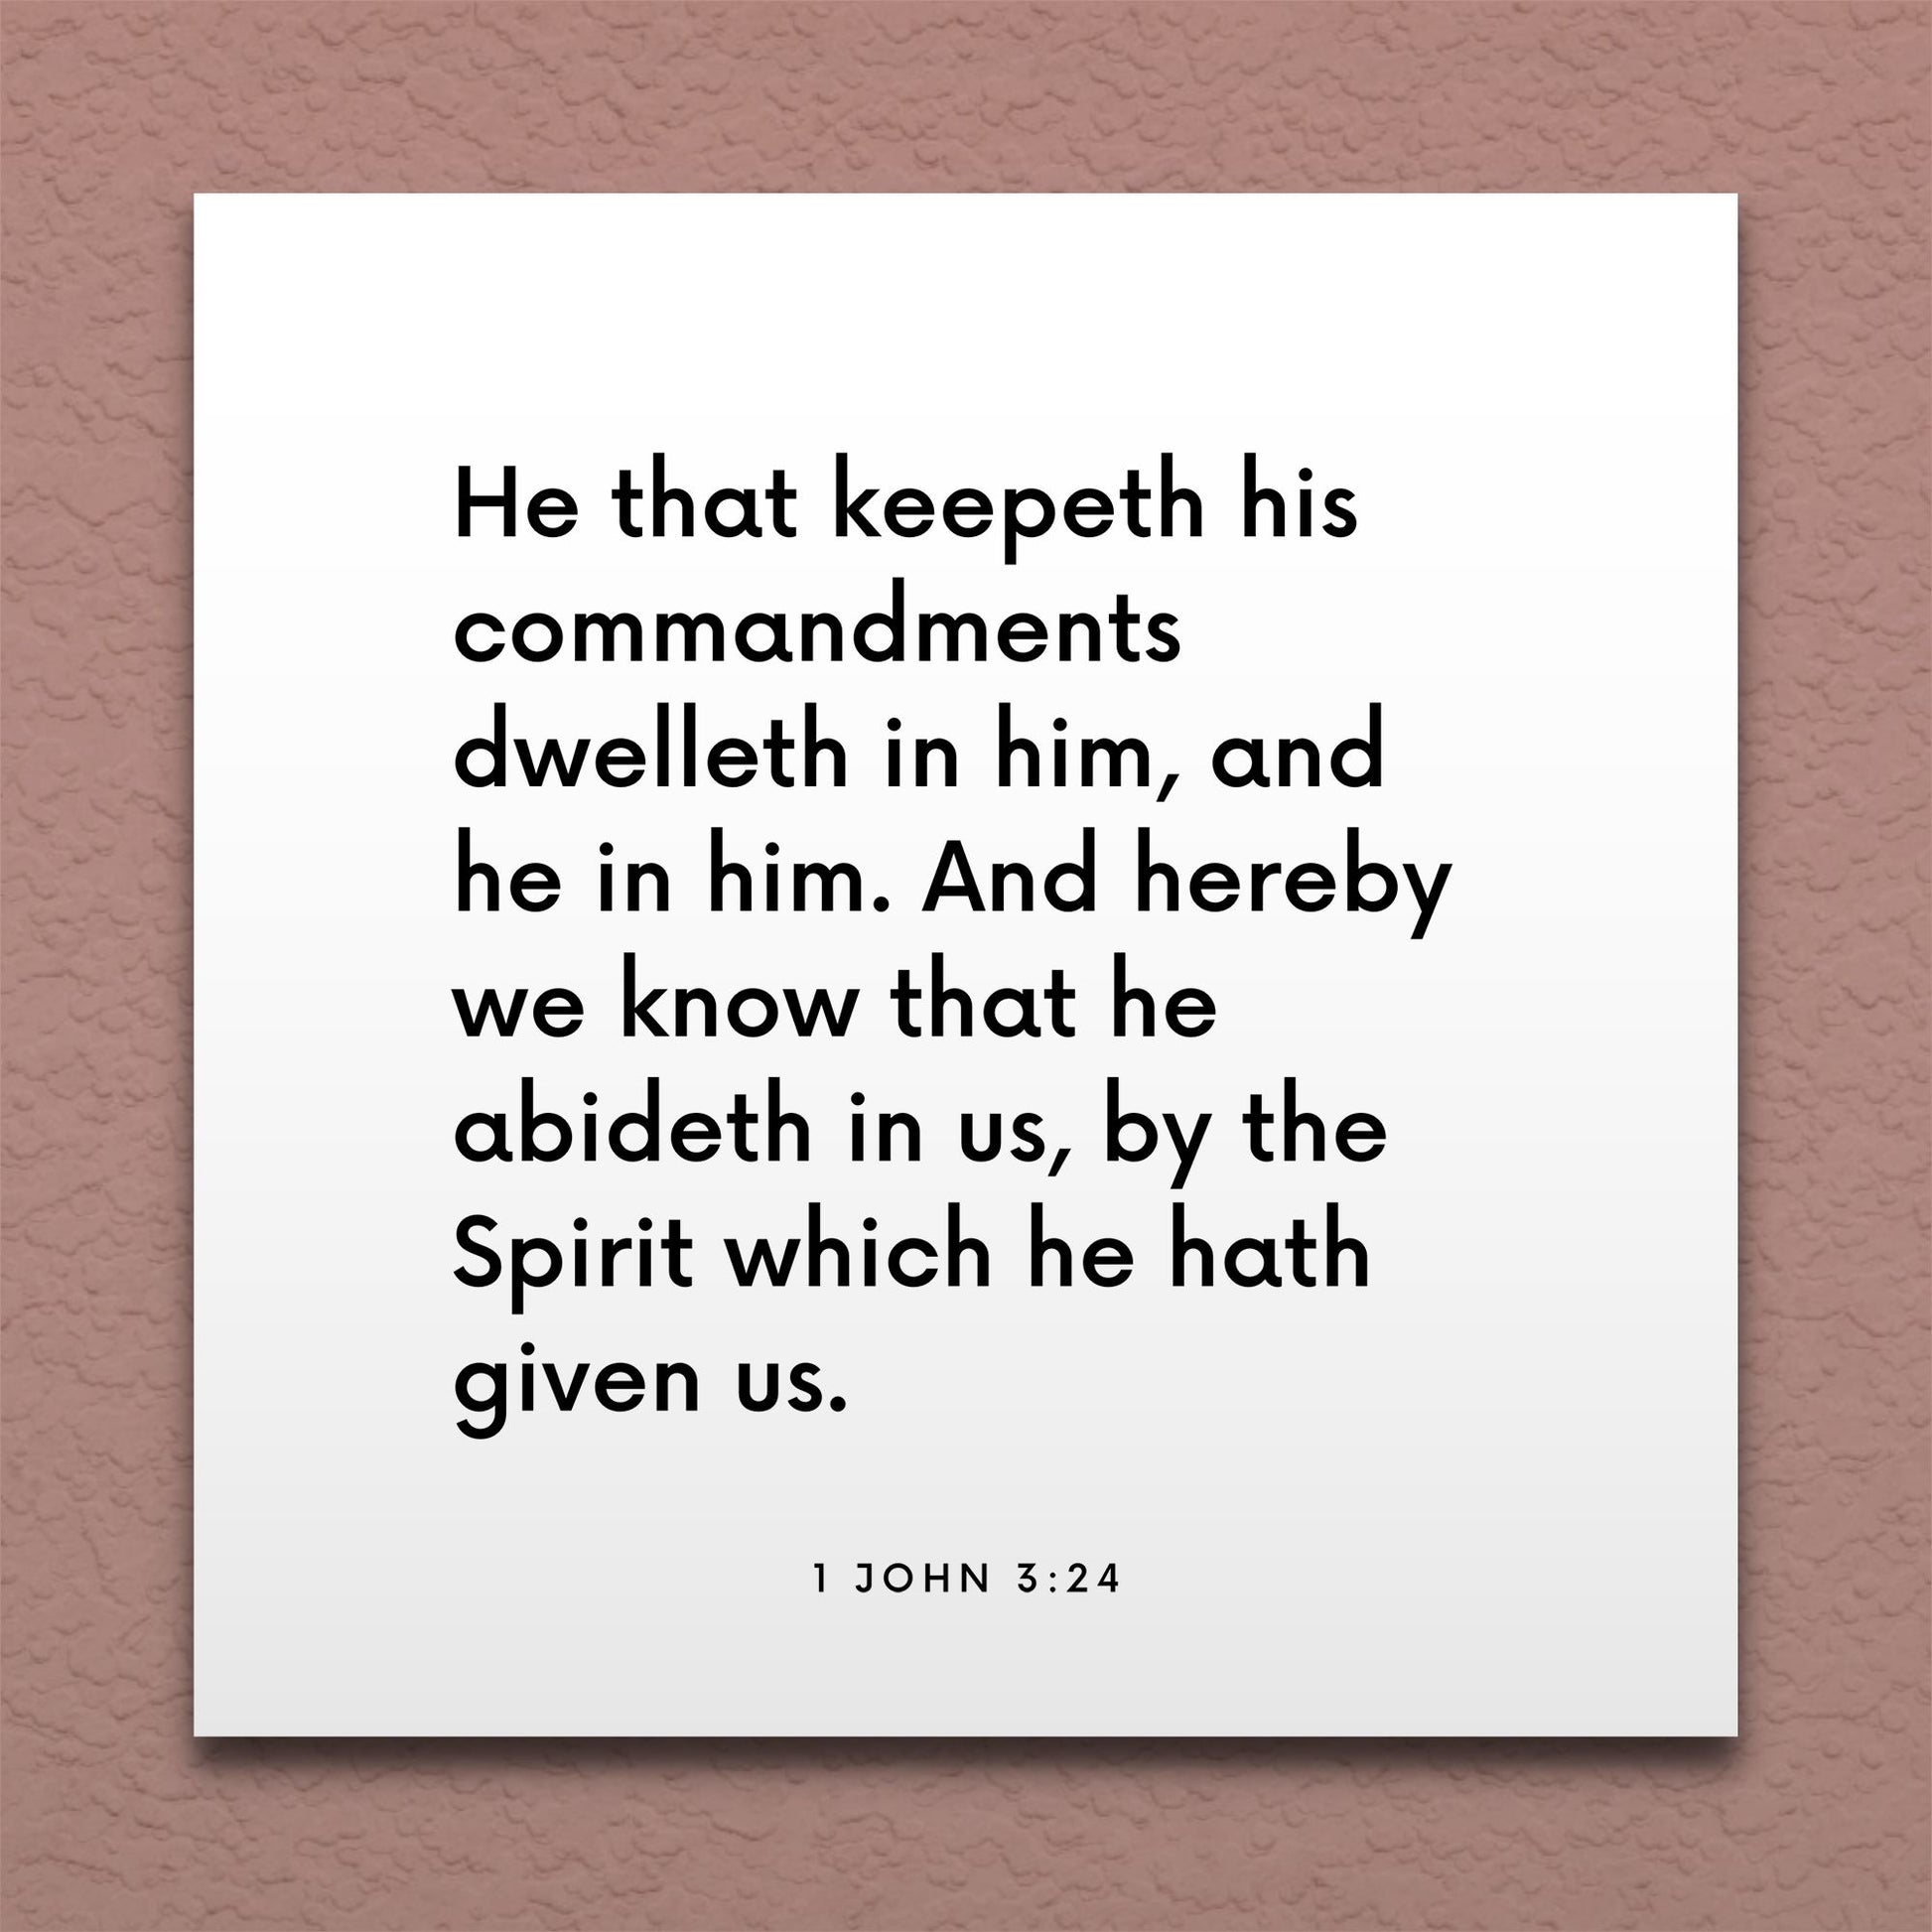 Wall-mounted scripture tile for 1 John 3:24 - "He that keepeth his commandments dwelleth in him"